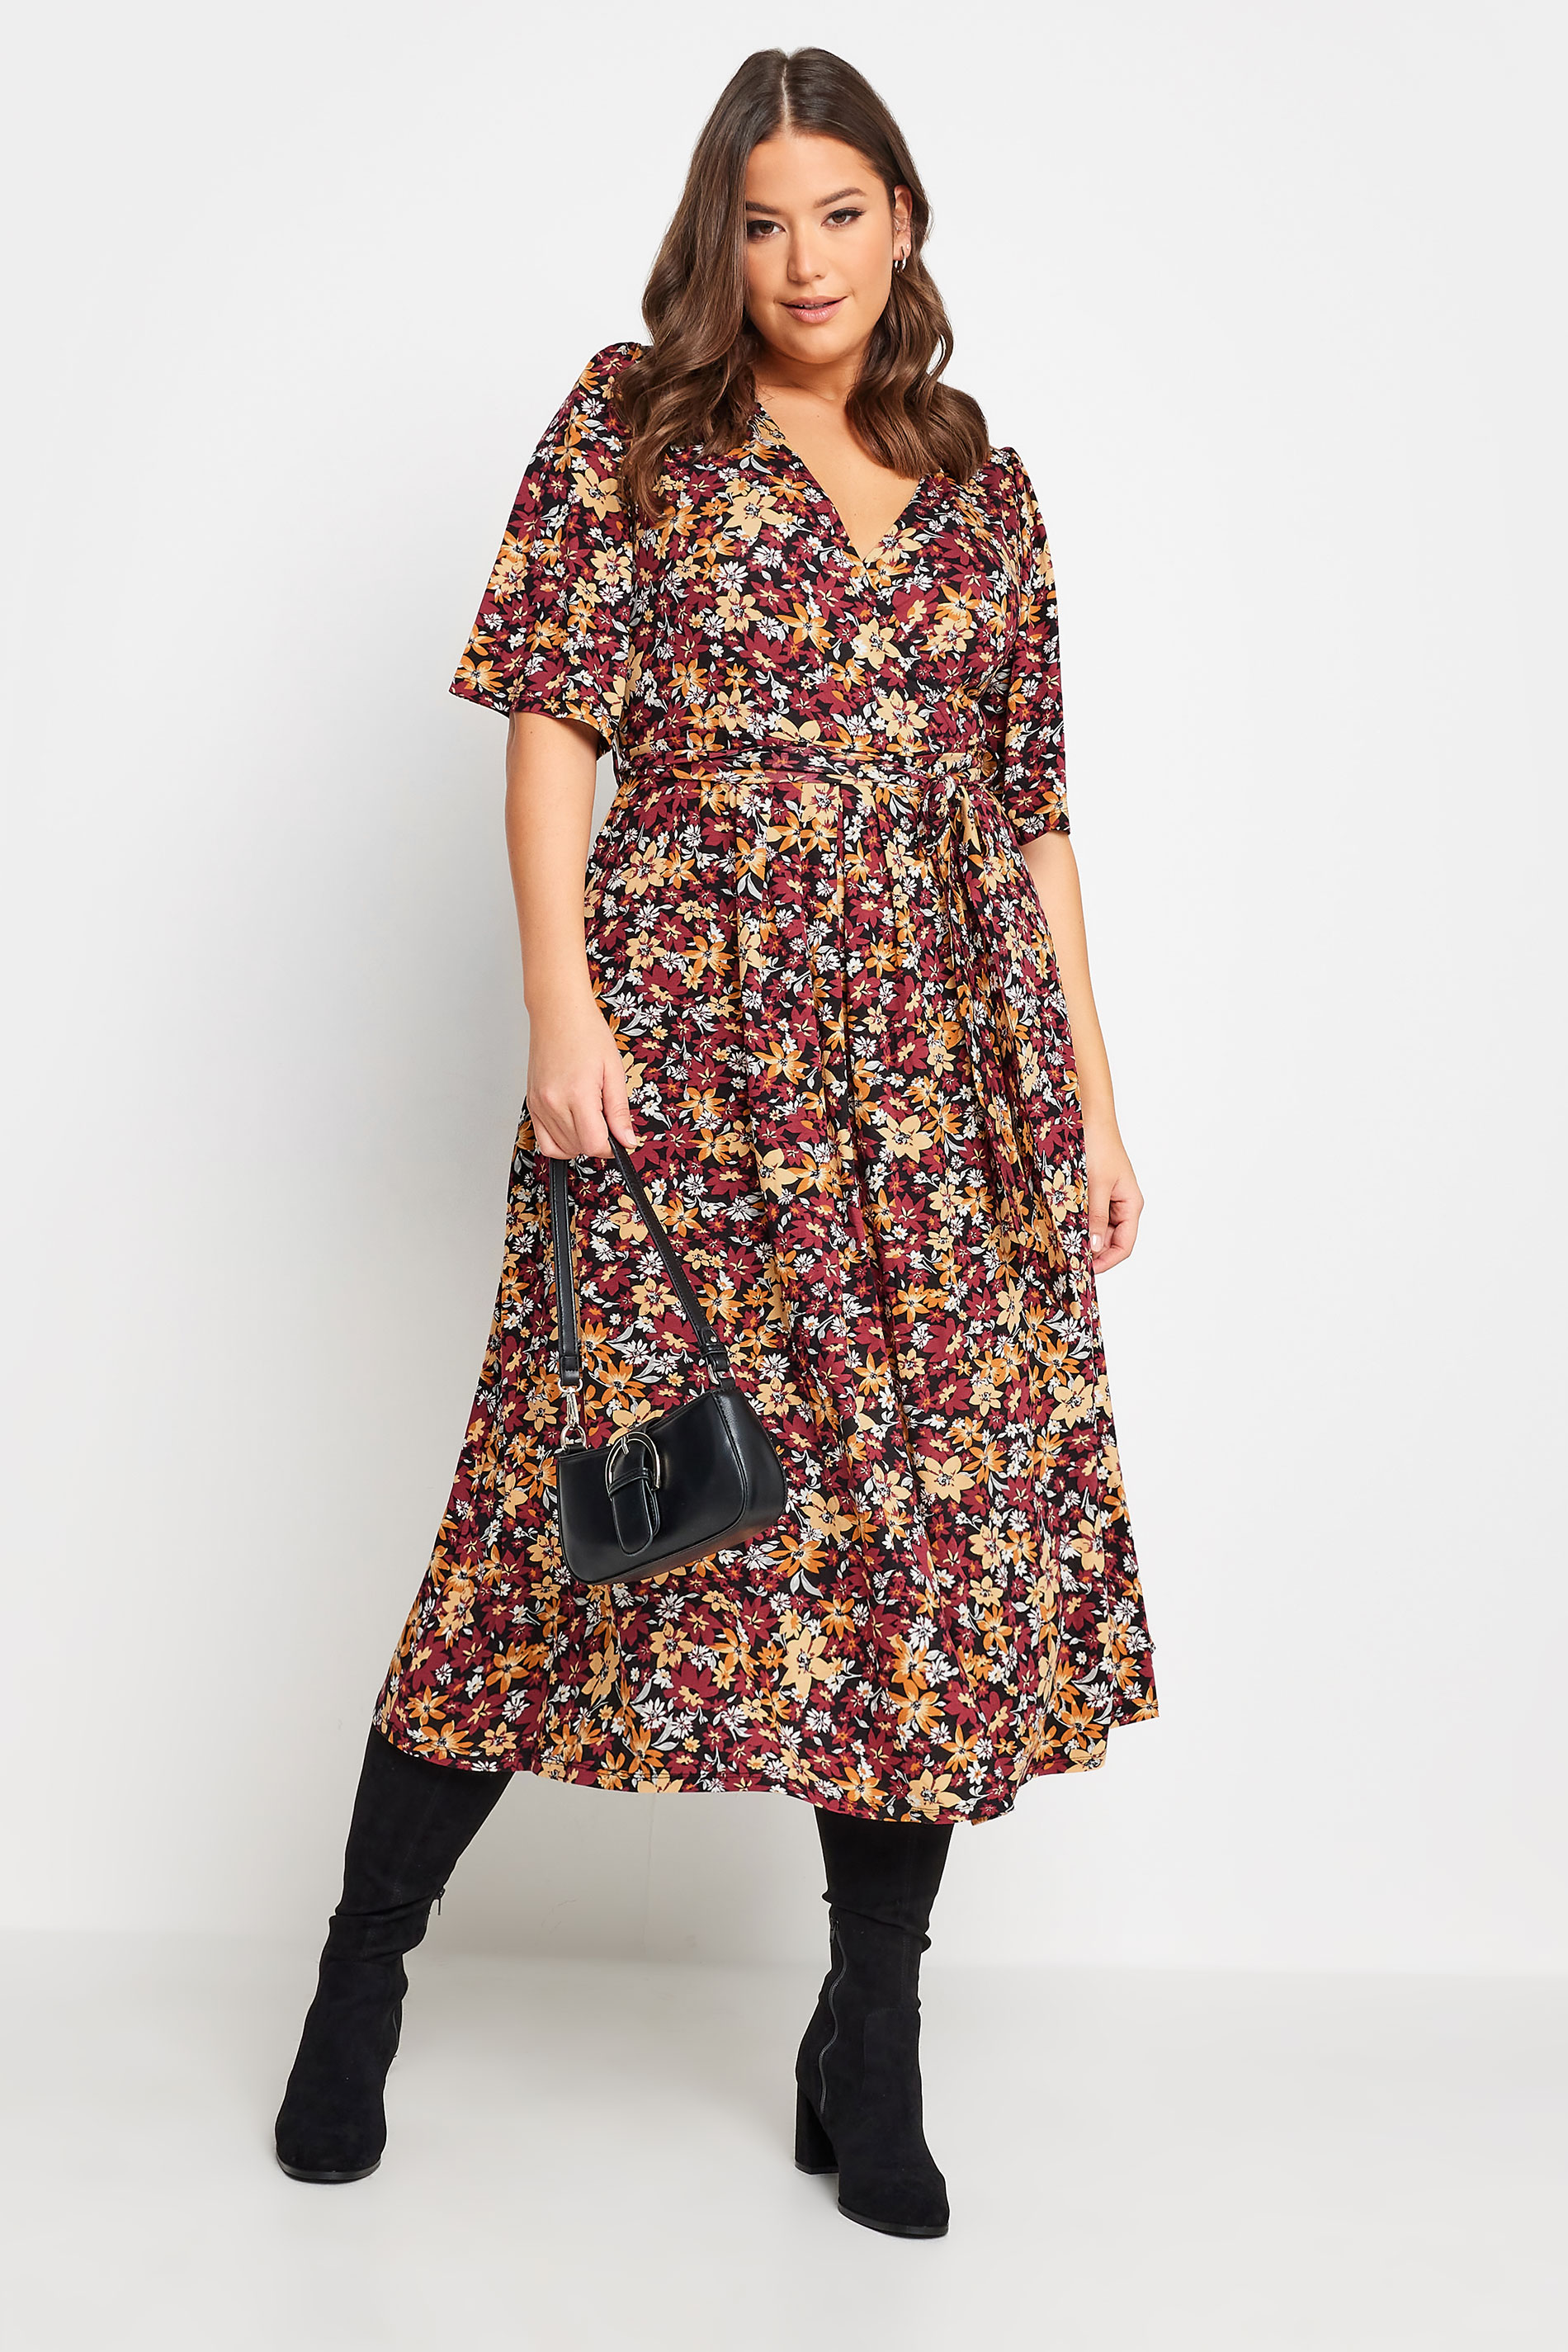 YOURS Plus Size Burgandy Red Floral Print Midaxi Wrap Dress | Yours Clothing 2